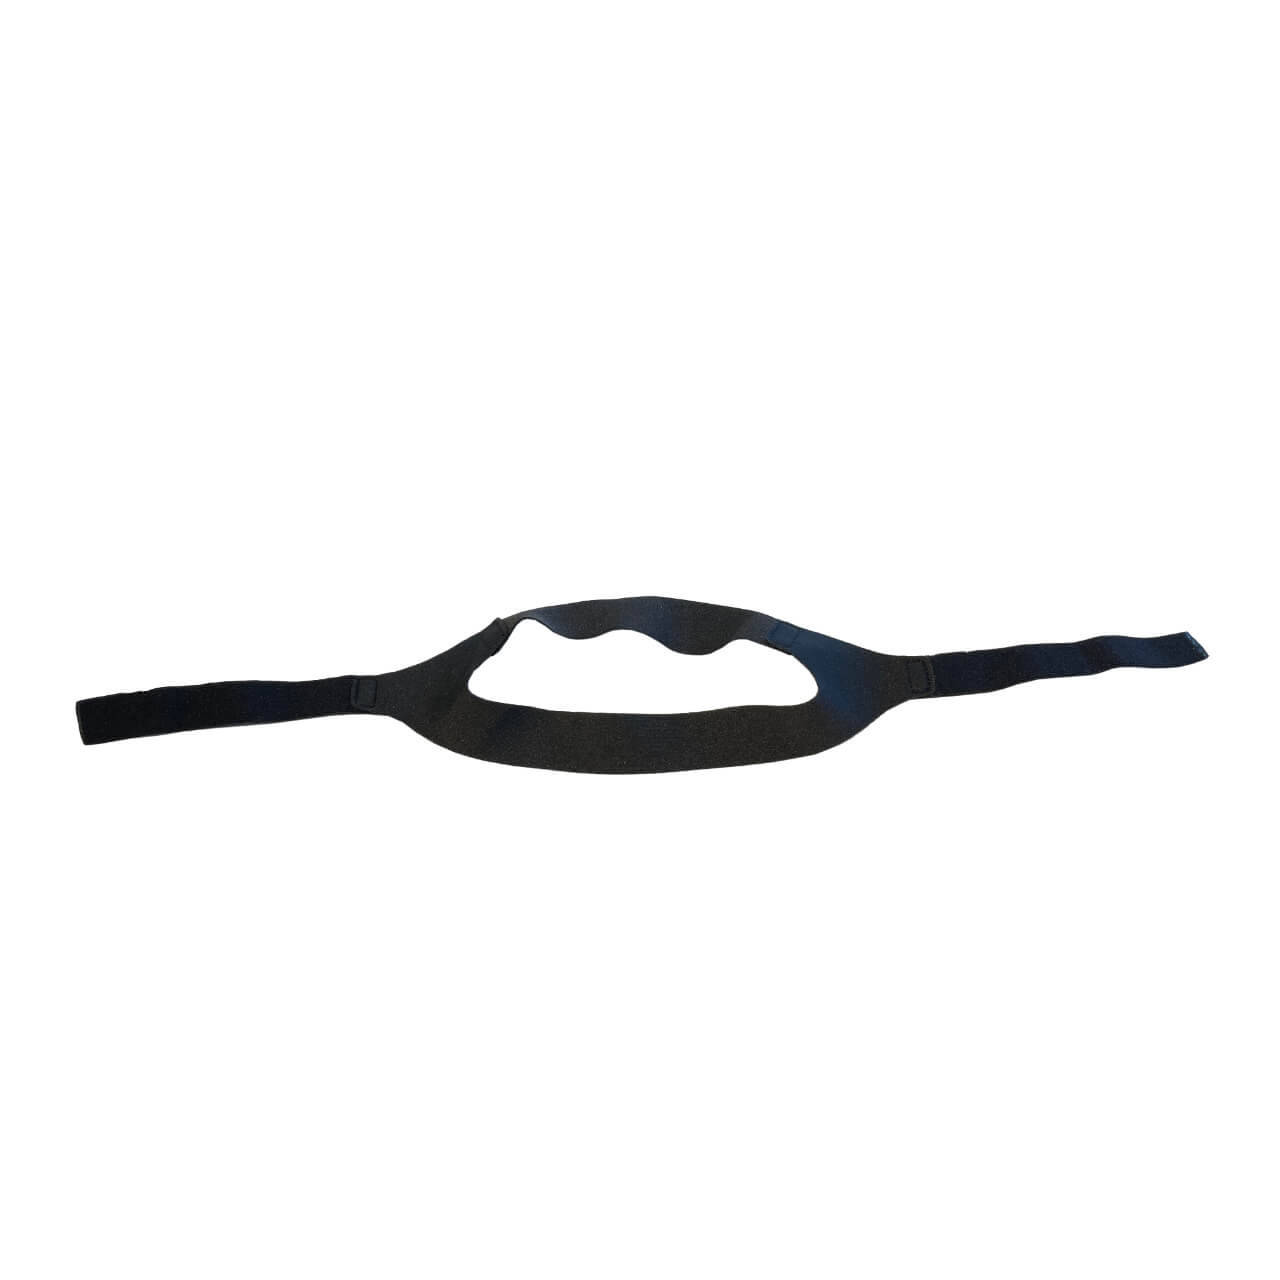 Optrel Headband Black Suit Swiss Air Mouth-Nose Mask 2pk